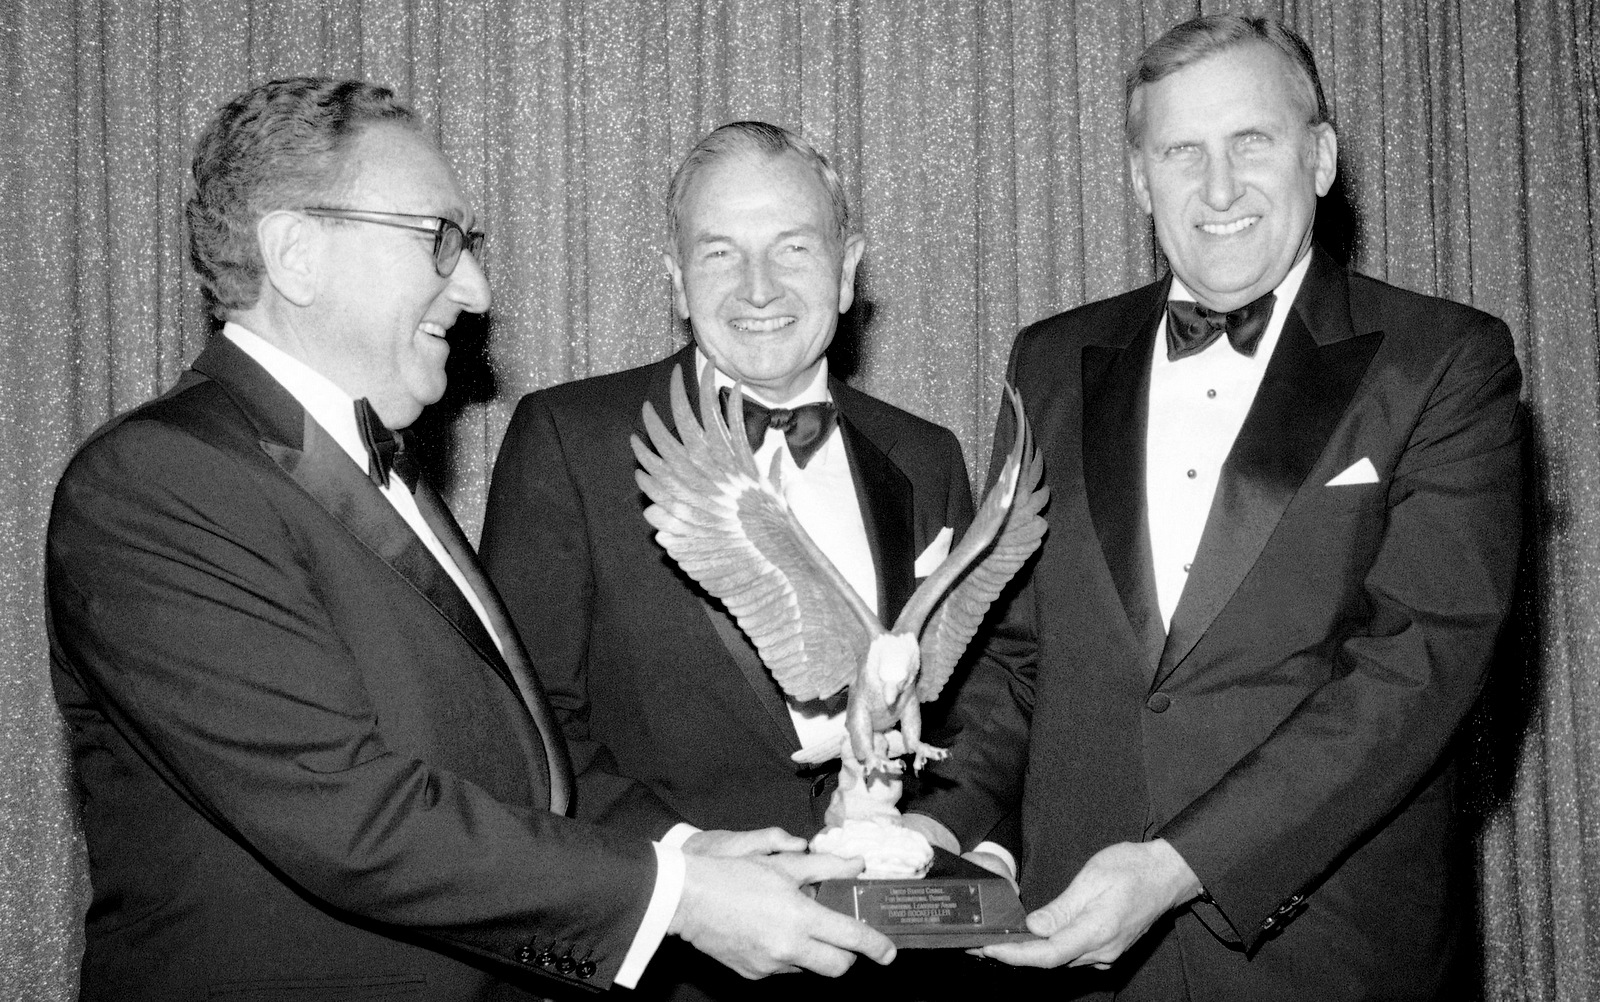 David Rockefeller, center, then chairman of the Chase Manhattan Bank International Advisory Committee, receives the 1983 International Leadership Award presented by Dr. Henry A. Kissinger, left, and Ralph A. Pfeiffer, Jr. on, Dec. 9, 1983. (AP/Ron Frehm)